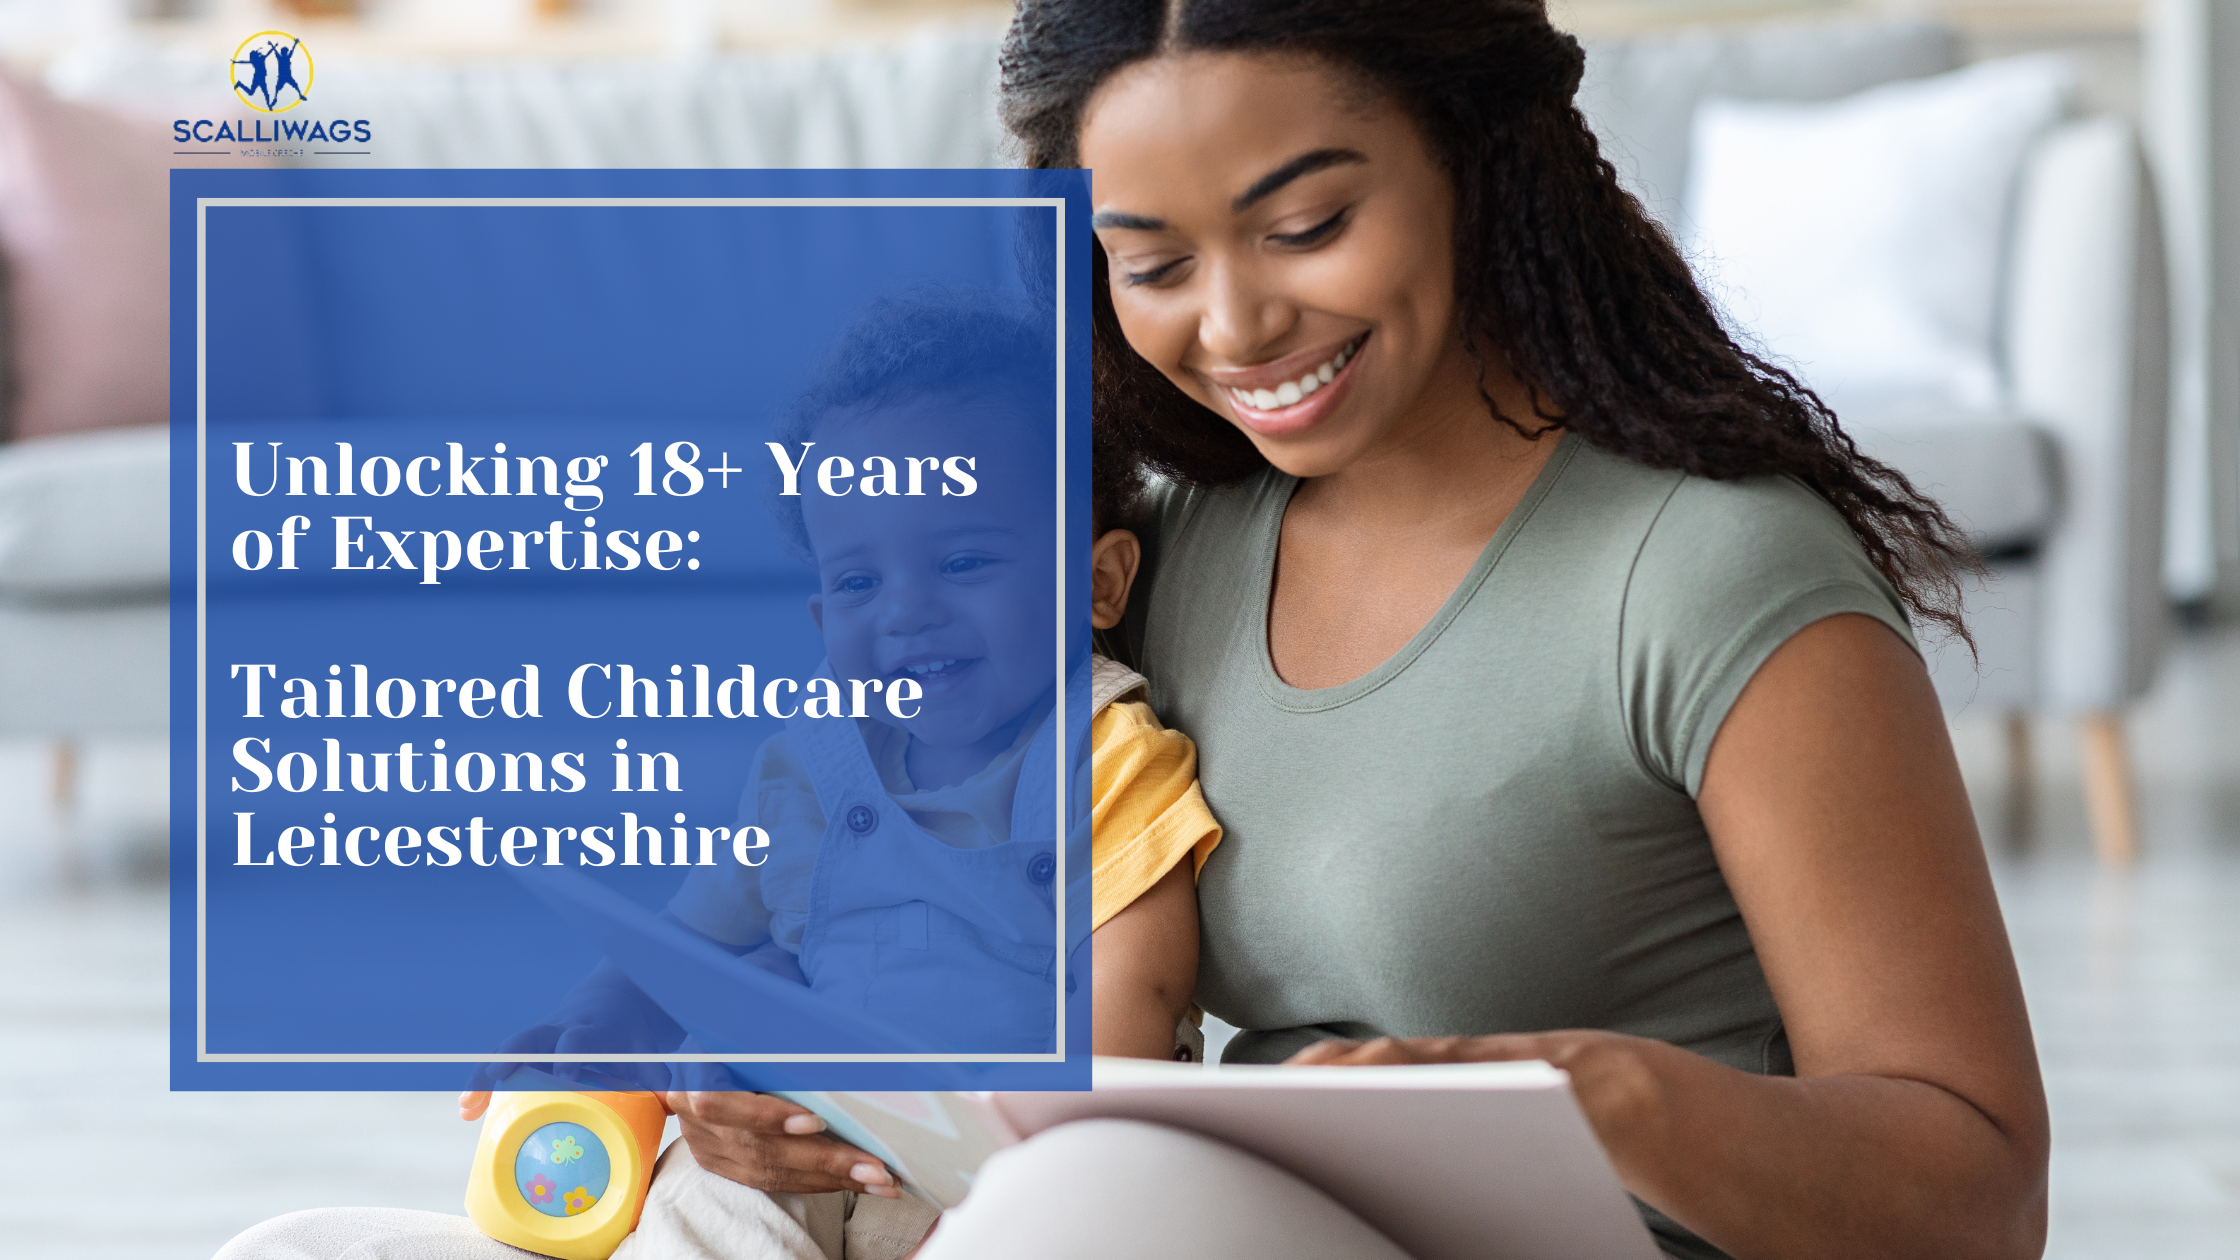 Unlocking 18+ Years of Expertise: From Private to Public sectors, We Meet Your Every Need! Contact Scalliwags Mobile Creche for Tailored Childcare Solutions in Leicestershire BLOG